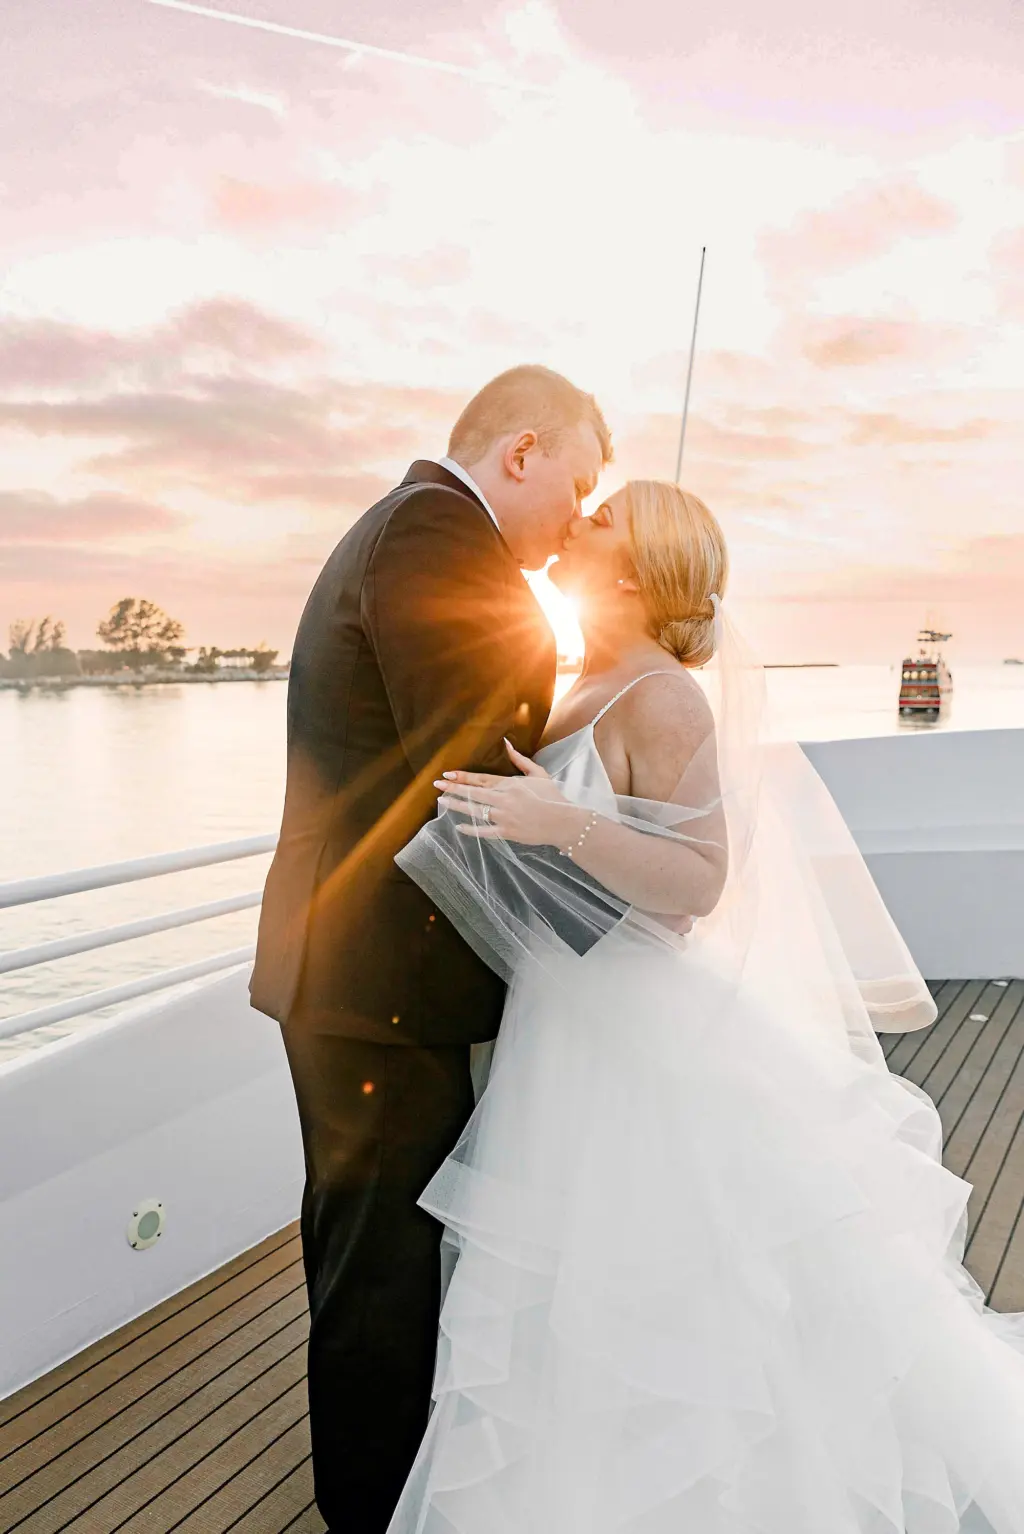 Bride and Groom Sunset Wedding Portrait | Elegant White Tiered Tulle A-Line Sophia Tolli Wedding Dress Inspiration | Tampa Bay Event Venue Yacht StarShip